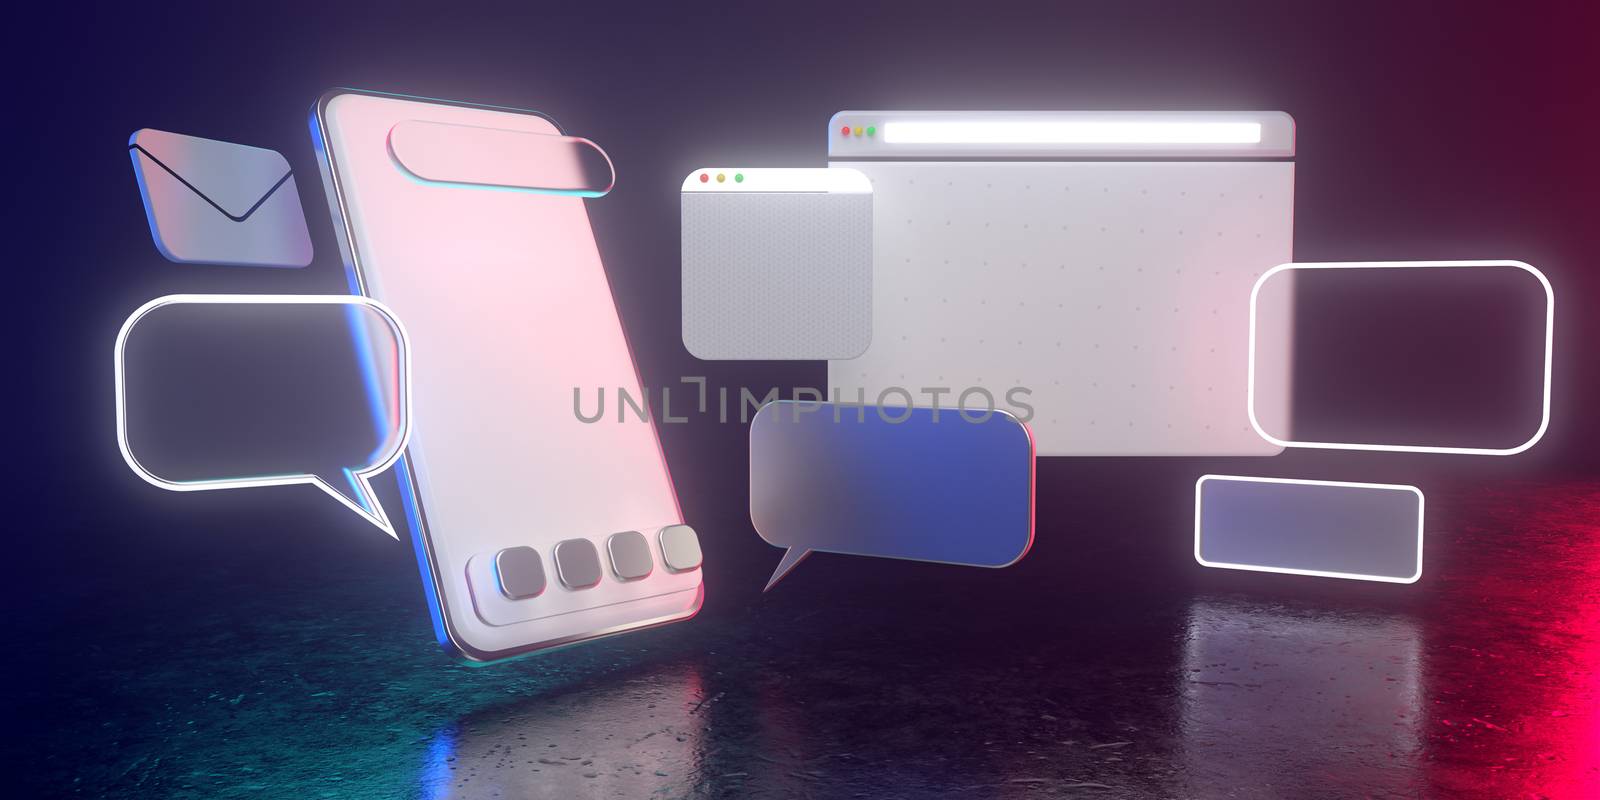 3d rendering of website icon and smartphone.